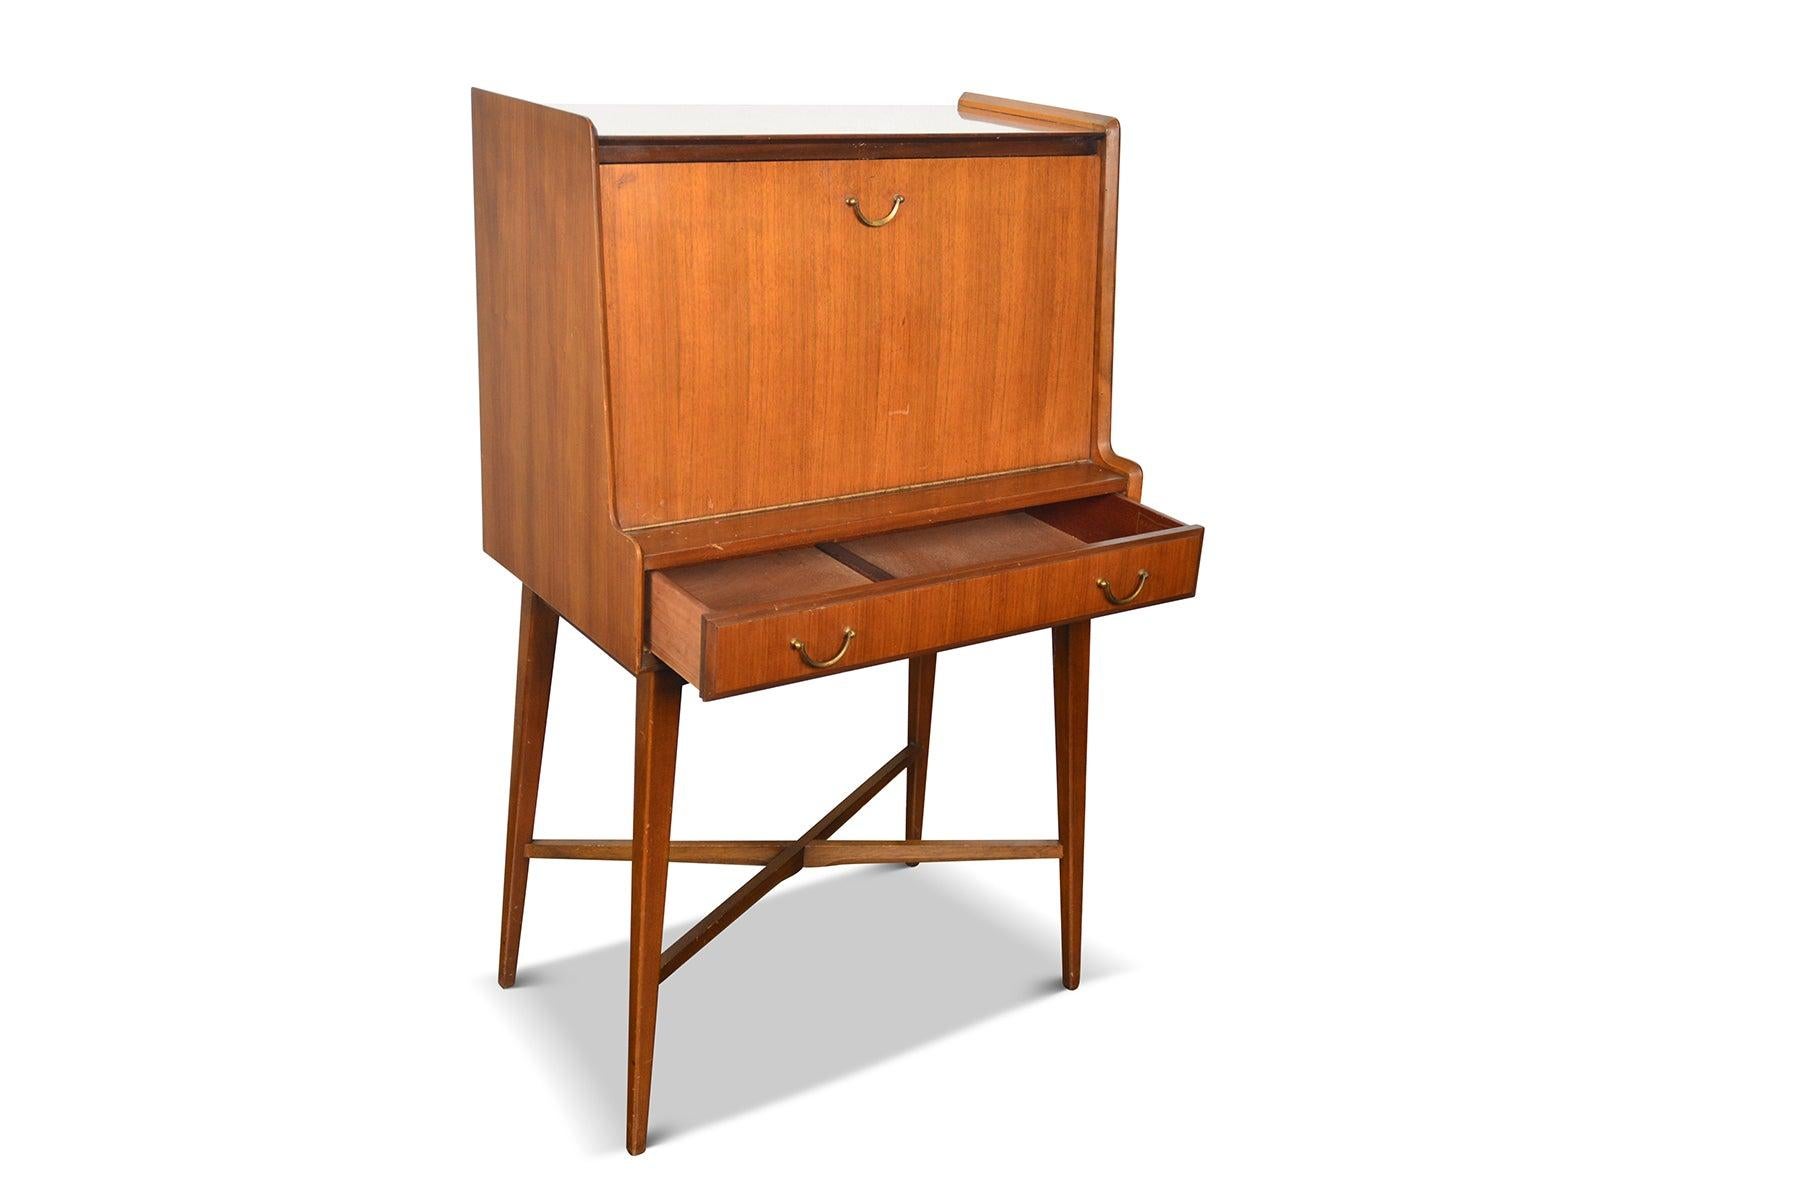 20th Century English Modern Tall Mid-Century Cocktail Cabinet For Sale